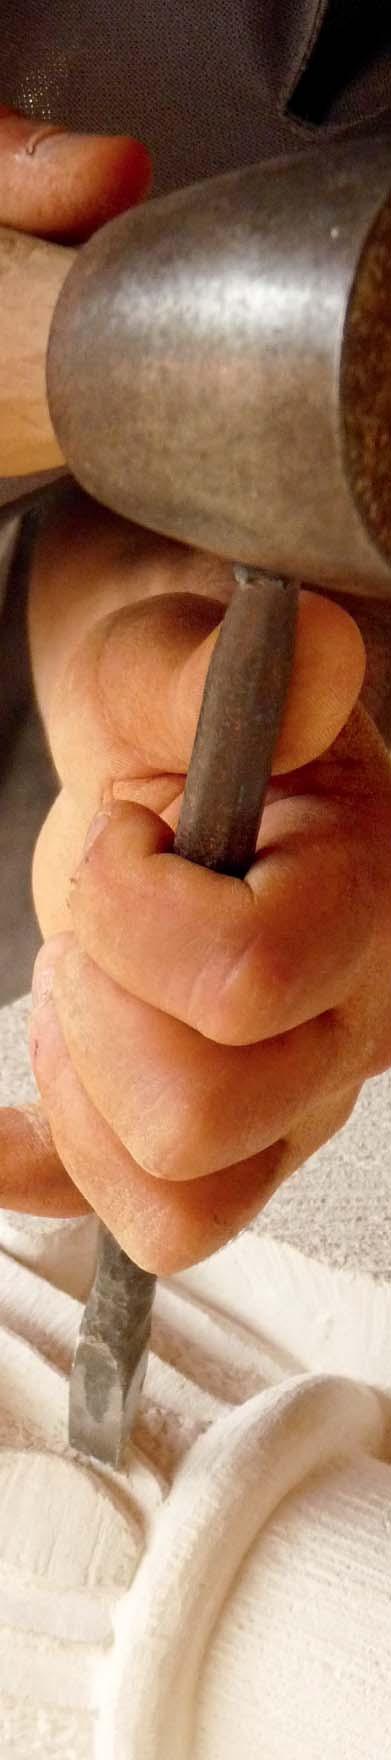 stone carving workshops Step into the shoes of a medieval